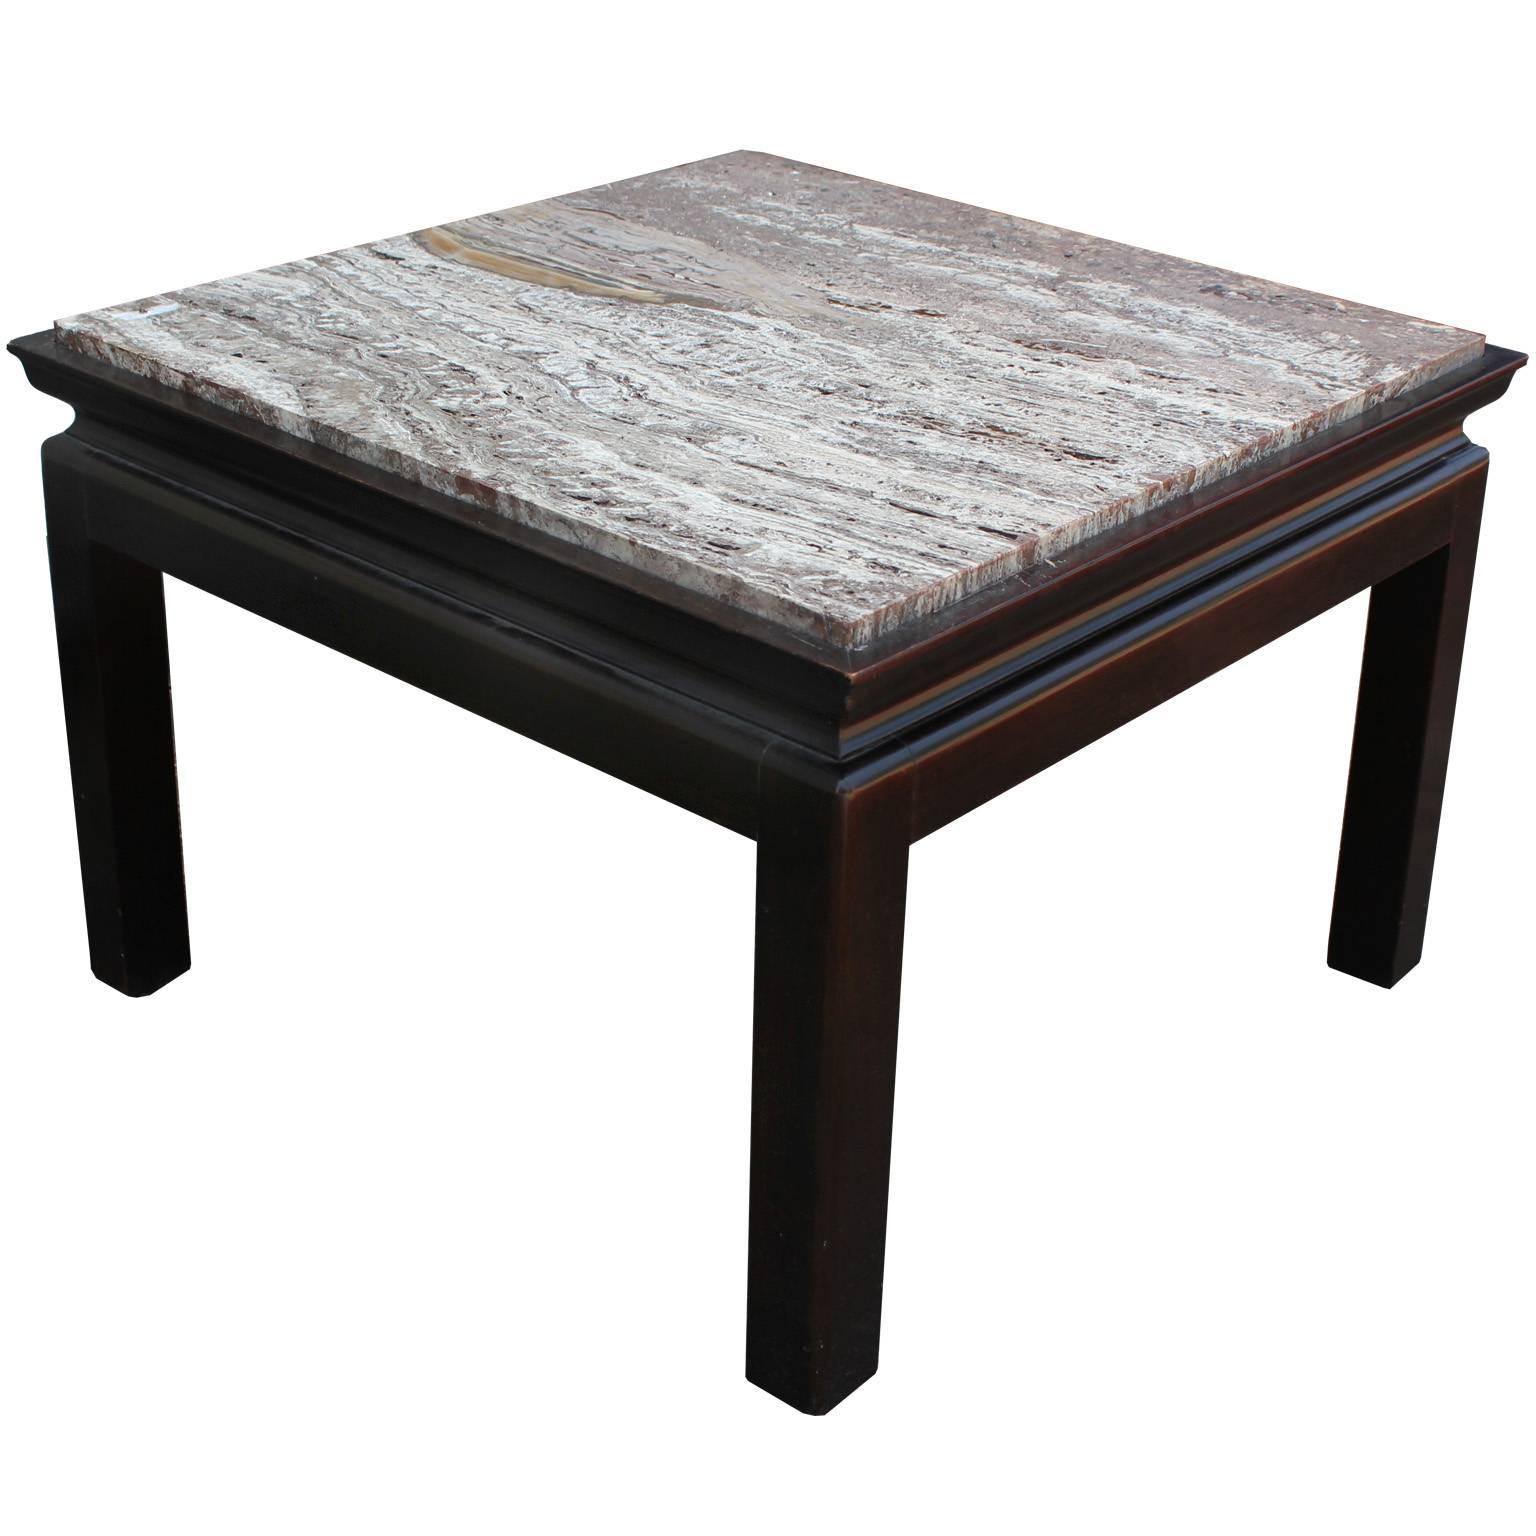 Elegant pair of Widdicomb side or end tables. Tables are topped in a beautifully grained marble. Bases are finished in a dark walnut. Tables have excellent clean lines with the perfect detailing. Would be perfect in a transitional, Mid-Century or